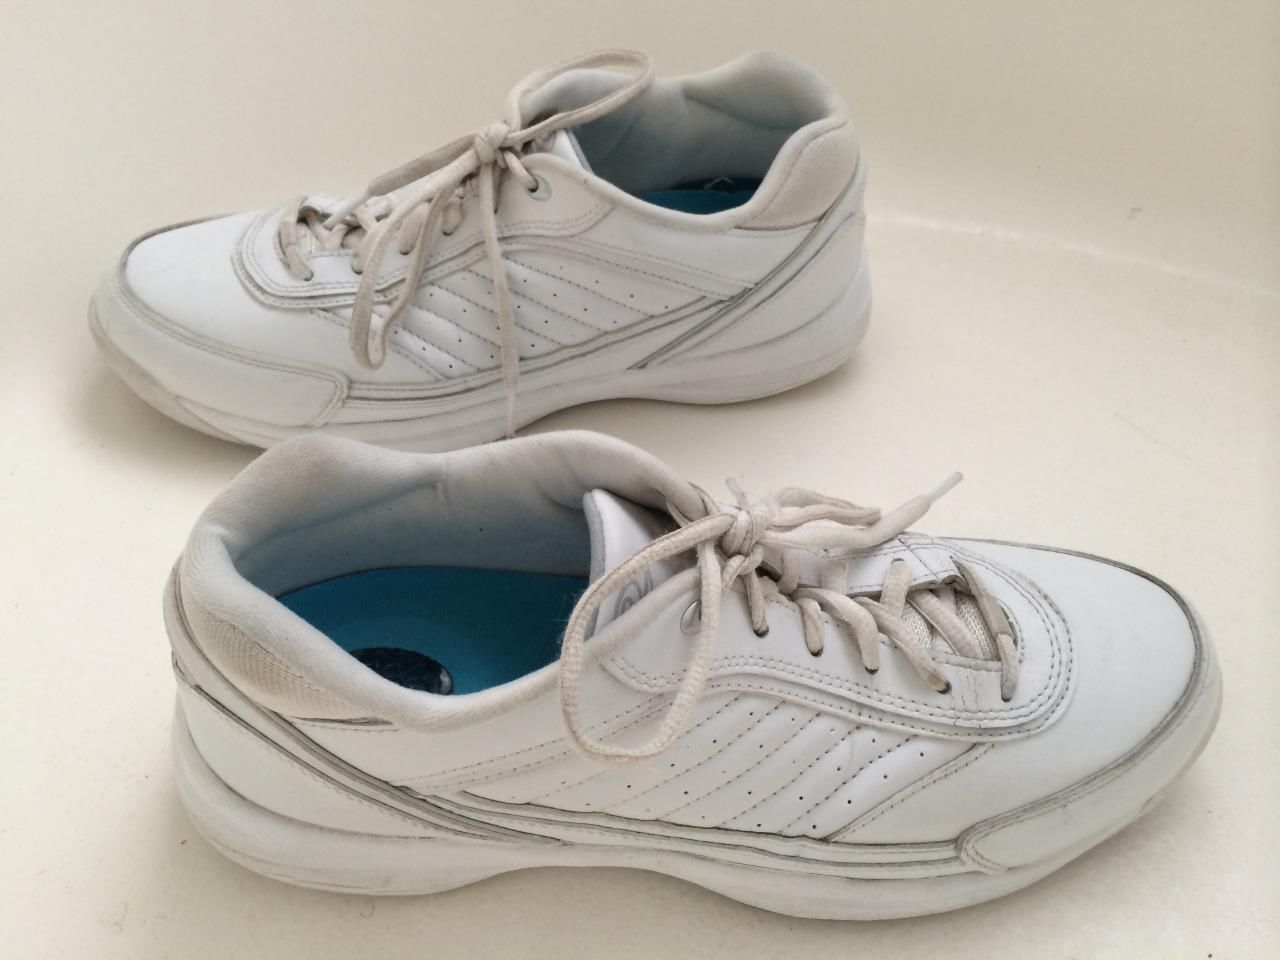 EASY SPIRIT WOMENS ATHLETIC RUNNING SHOES SIZE 11 For Sale - Item #1481215